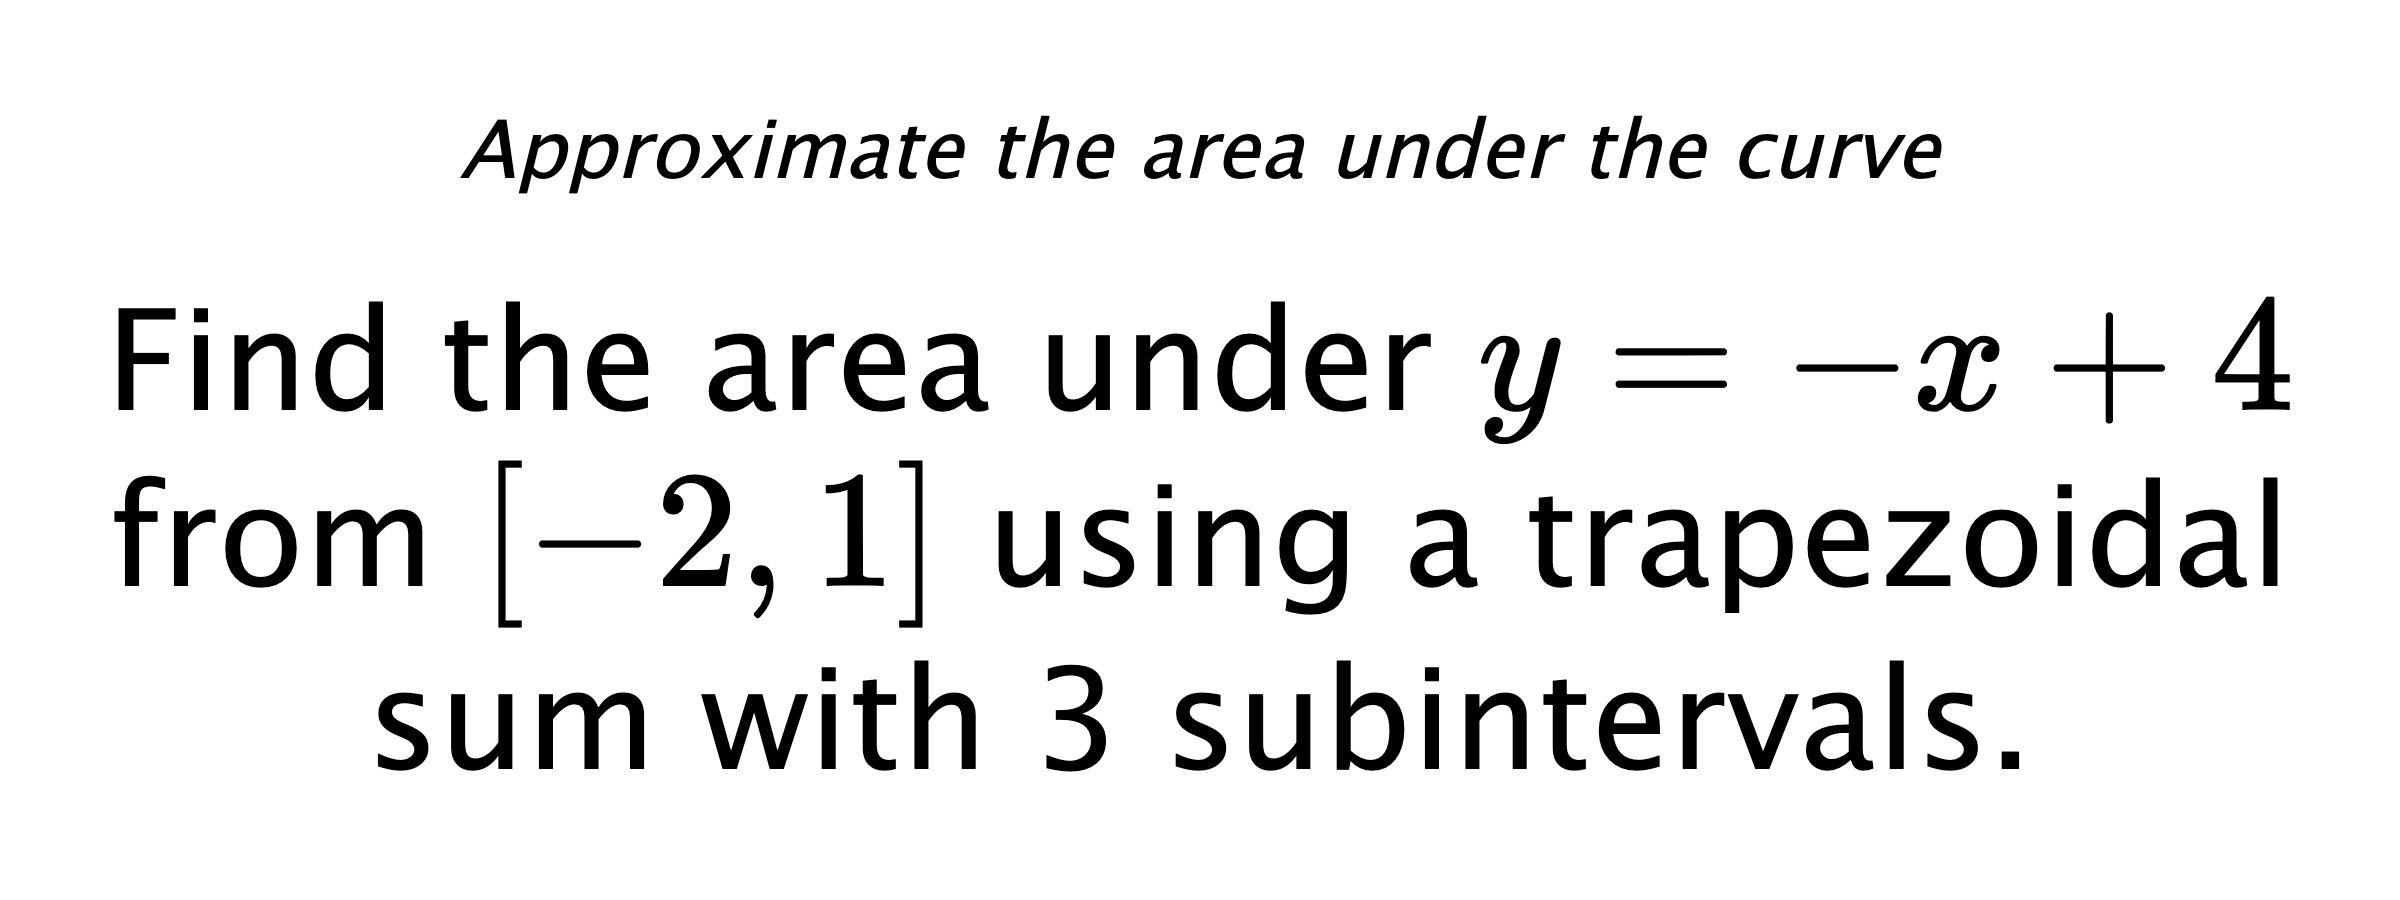 Approximate the area under the curve Find the area under $ y=-x+4 $ from $ [-2,1] $ using a trapezoidal sum with 3 subintervals.